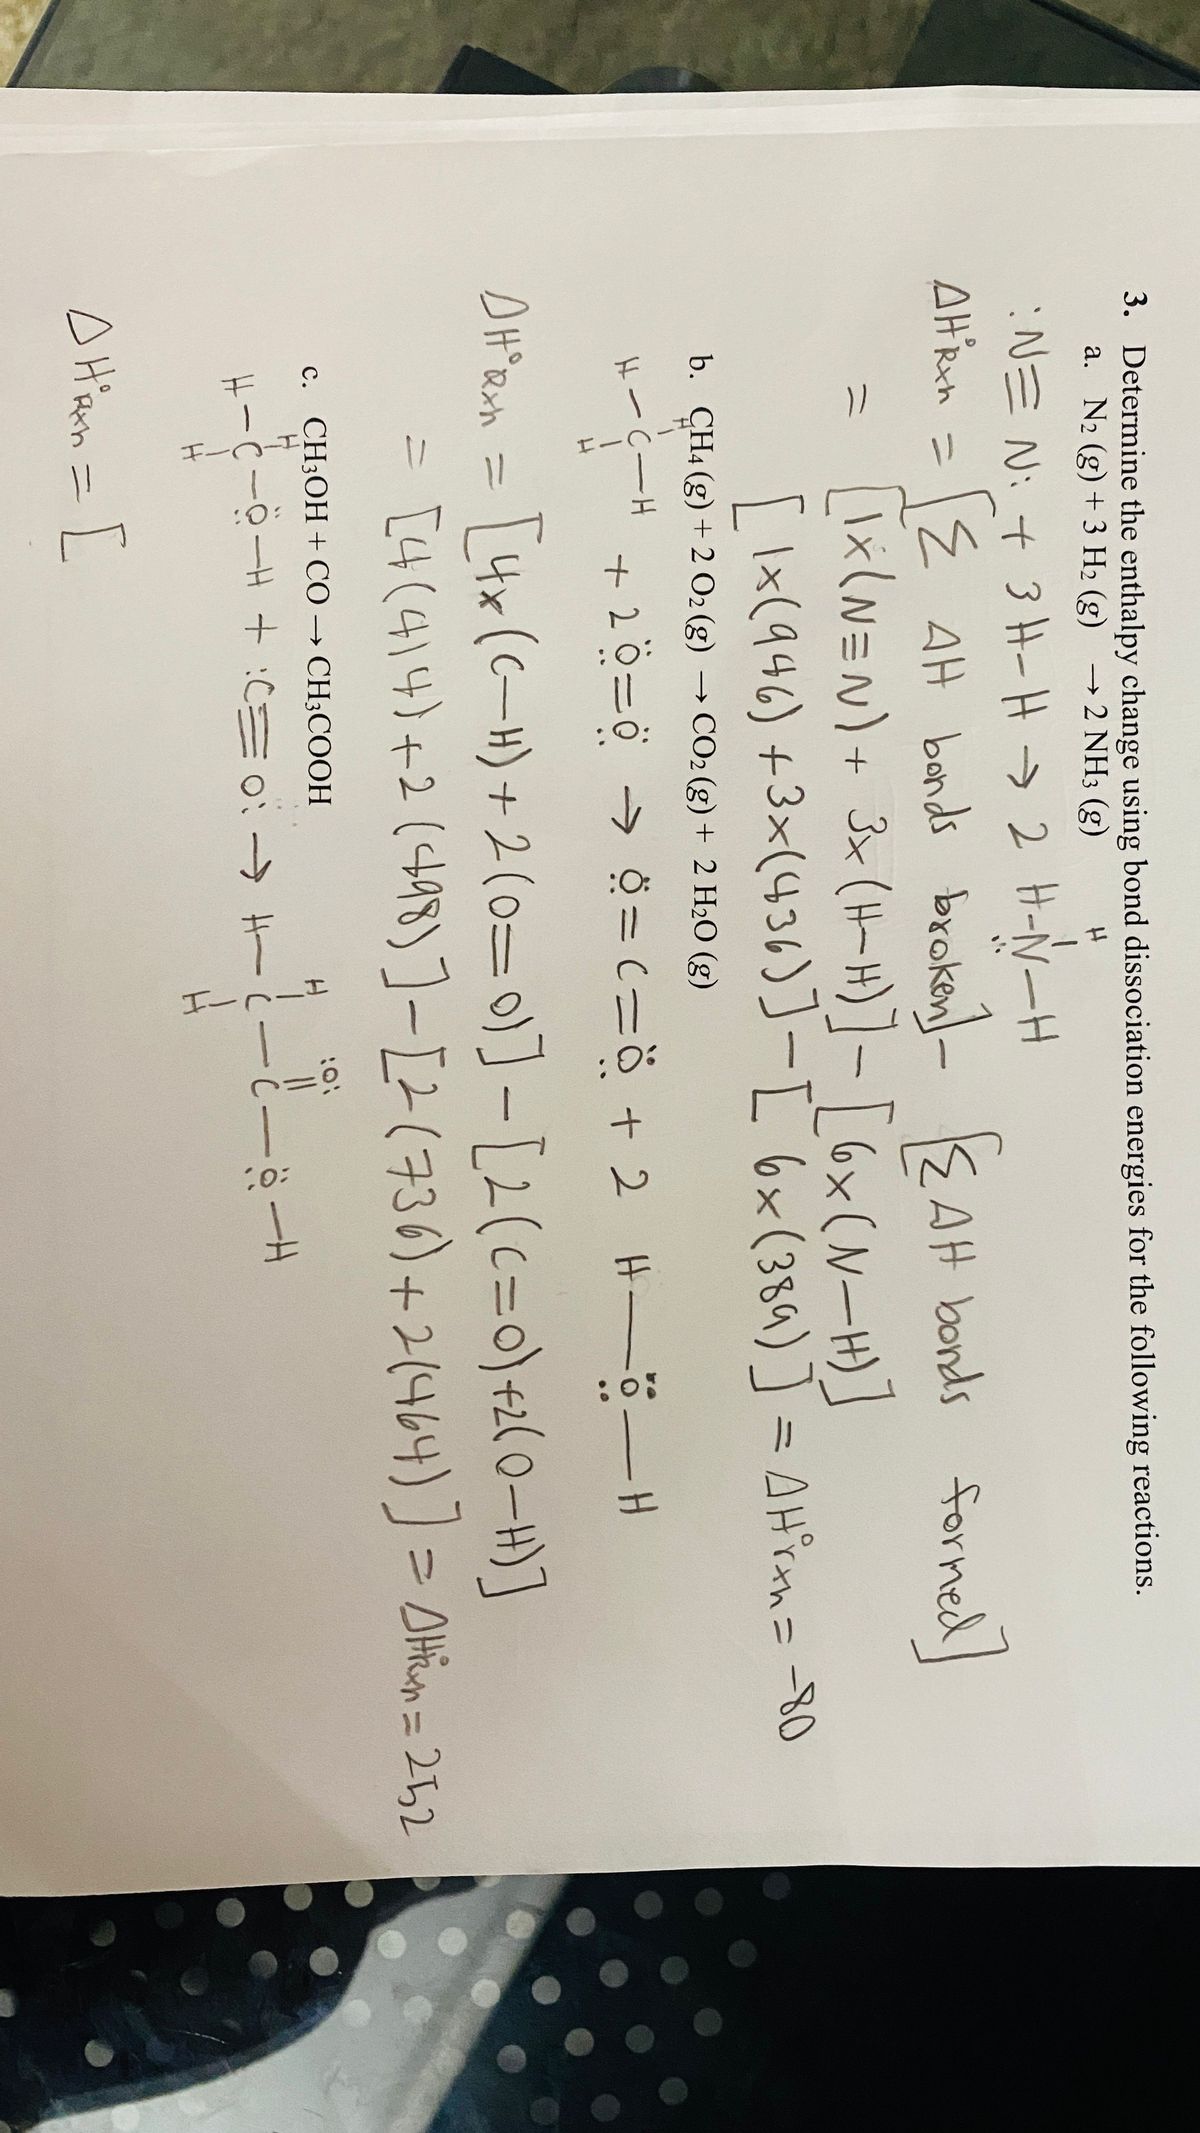 Answered 3 Determine The Enthalpy Change Using Bartleby